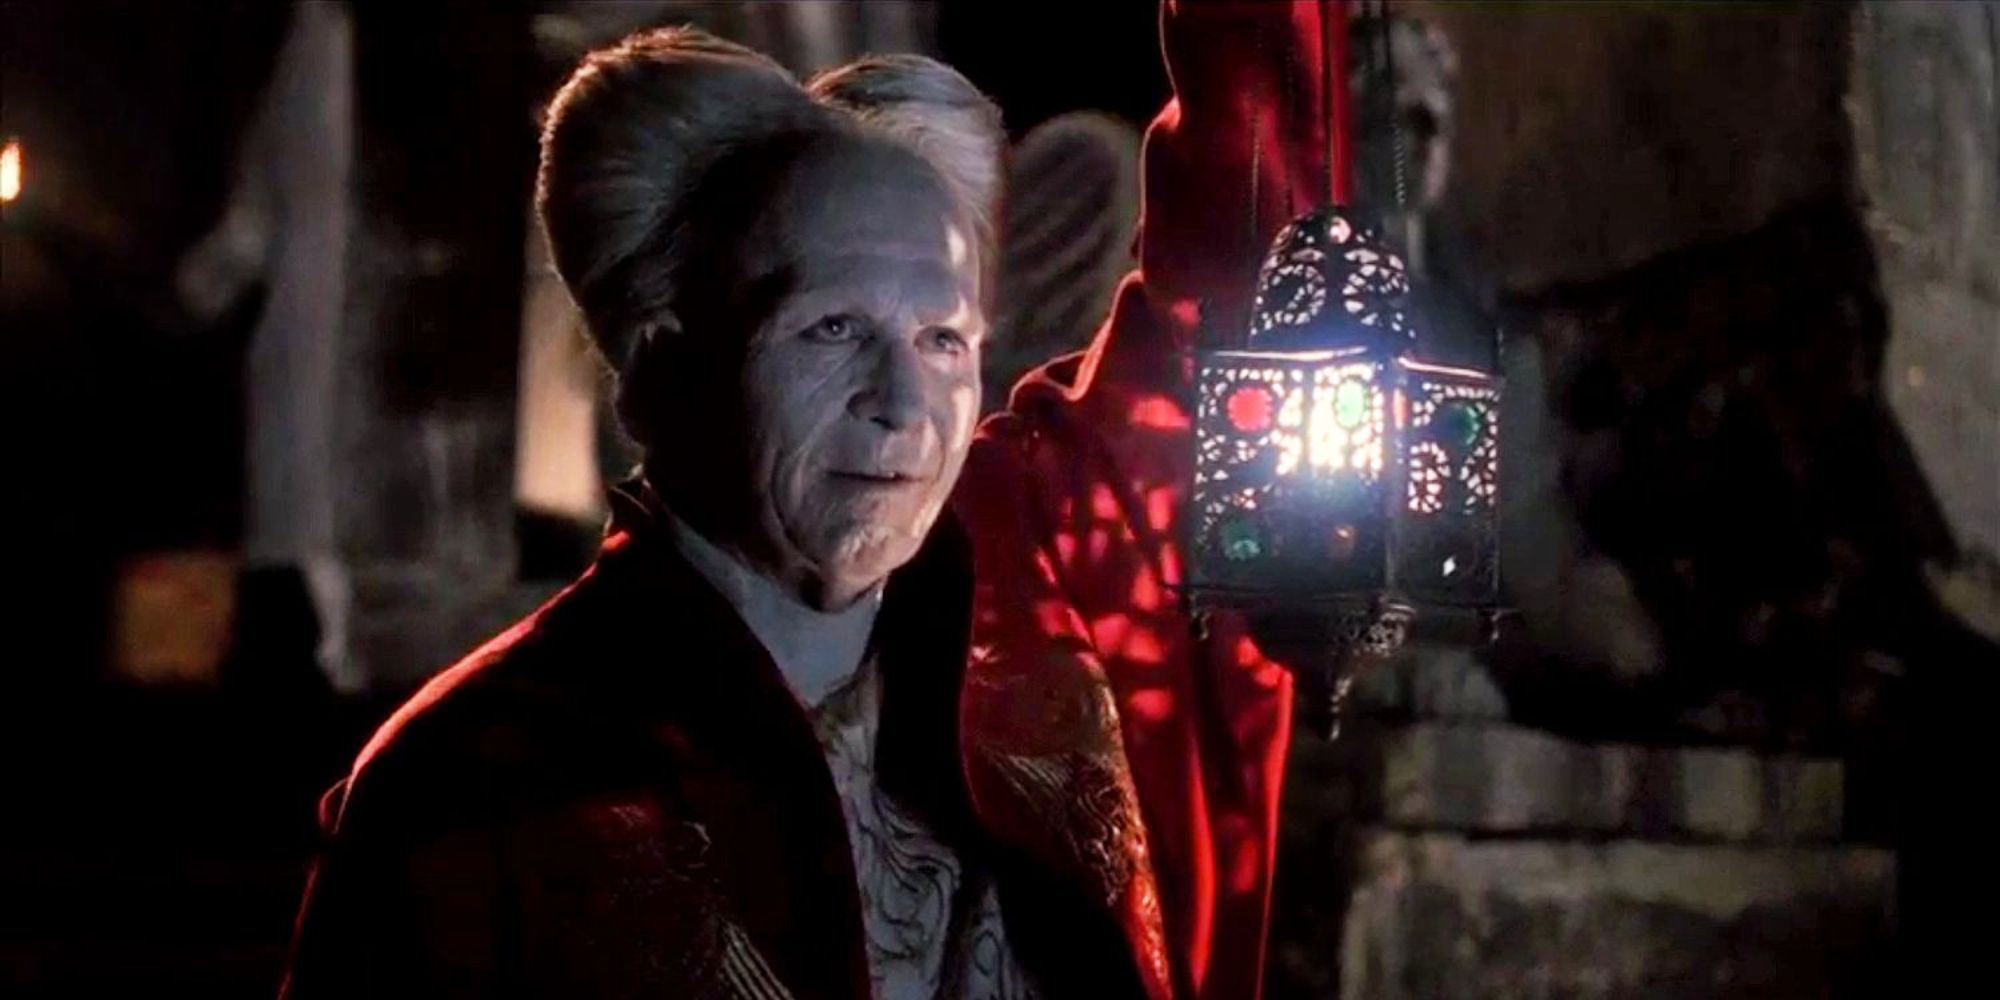 Dracula smiling while holding a lamp in Bram Stoker's Dracula